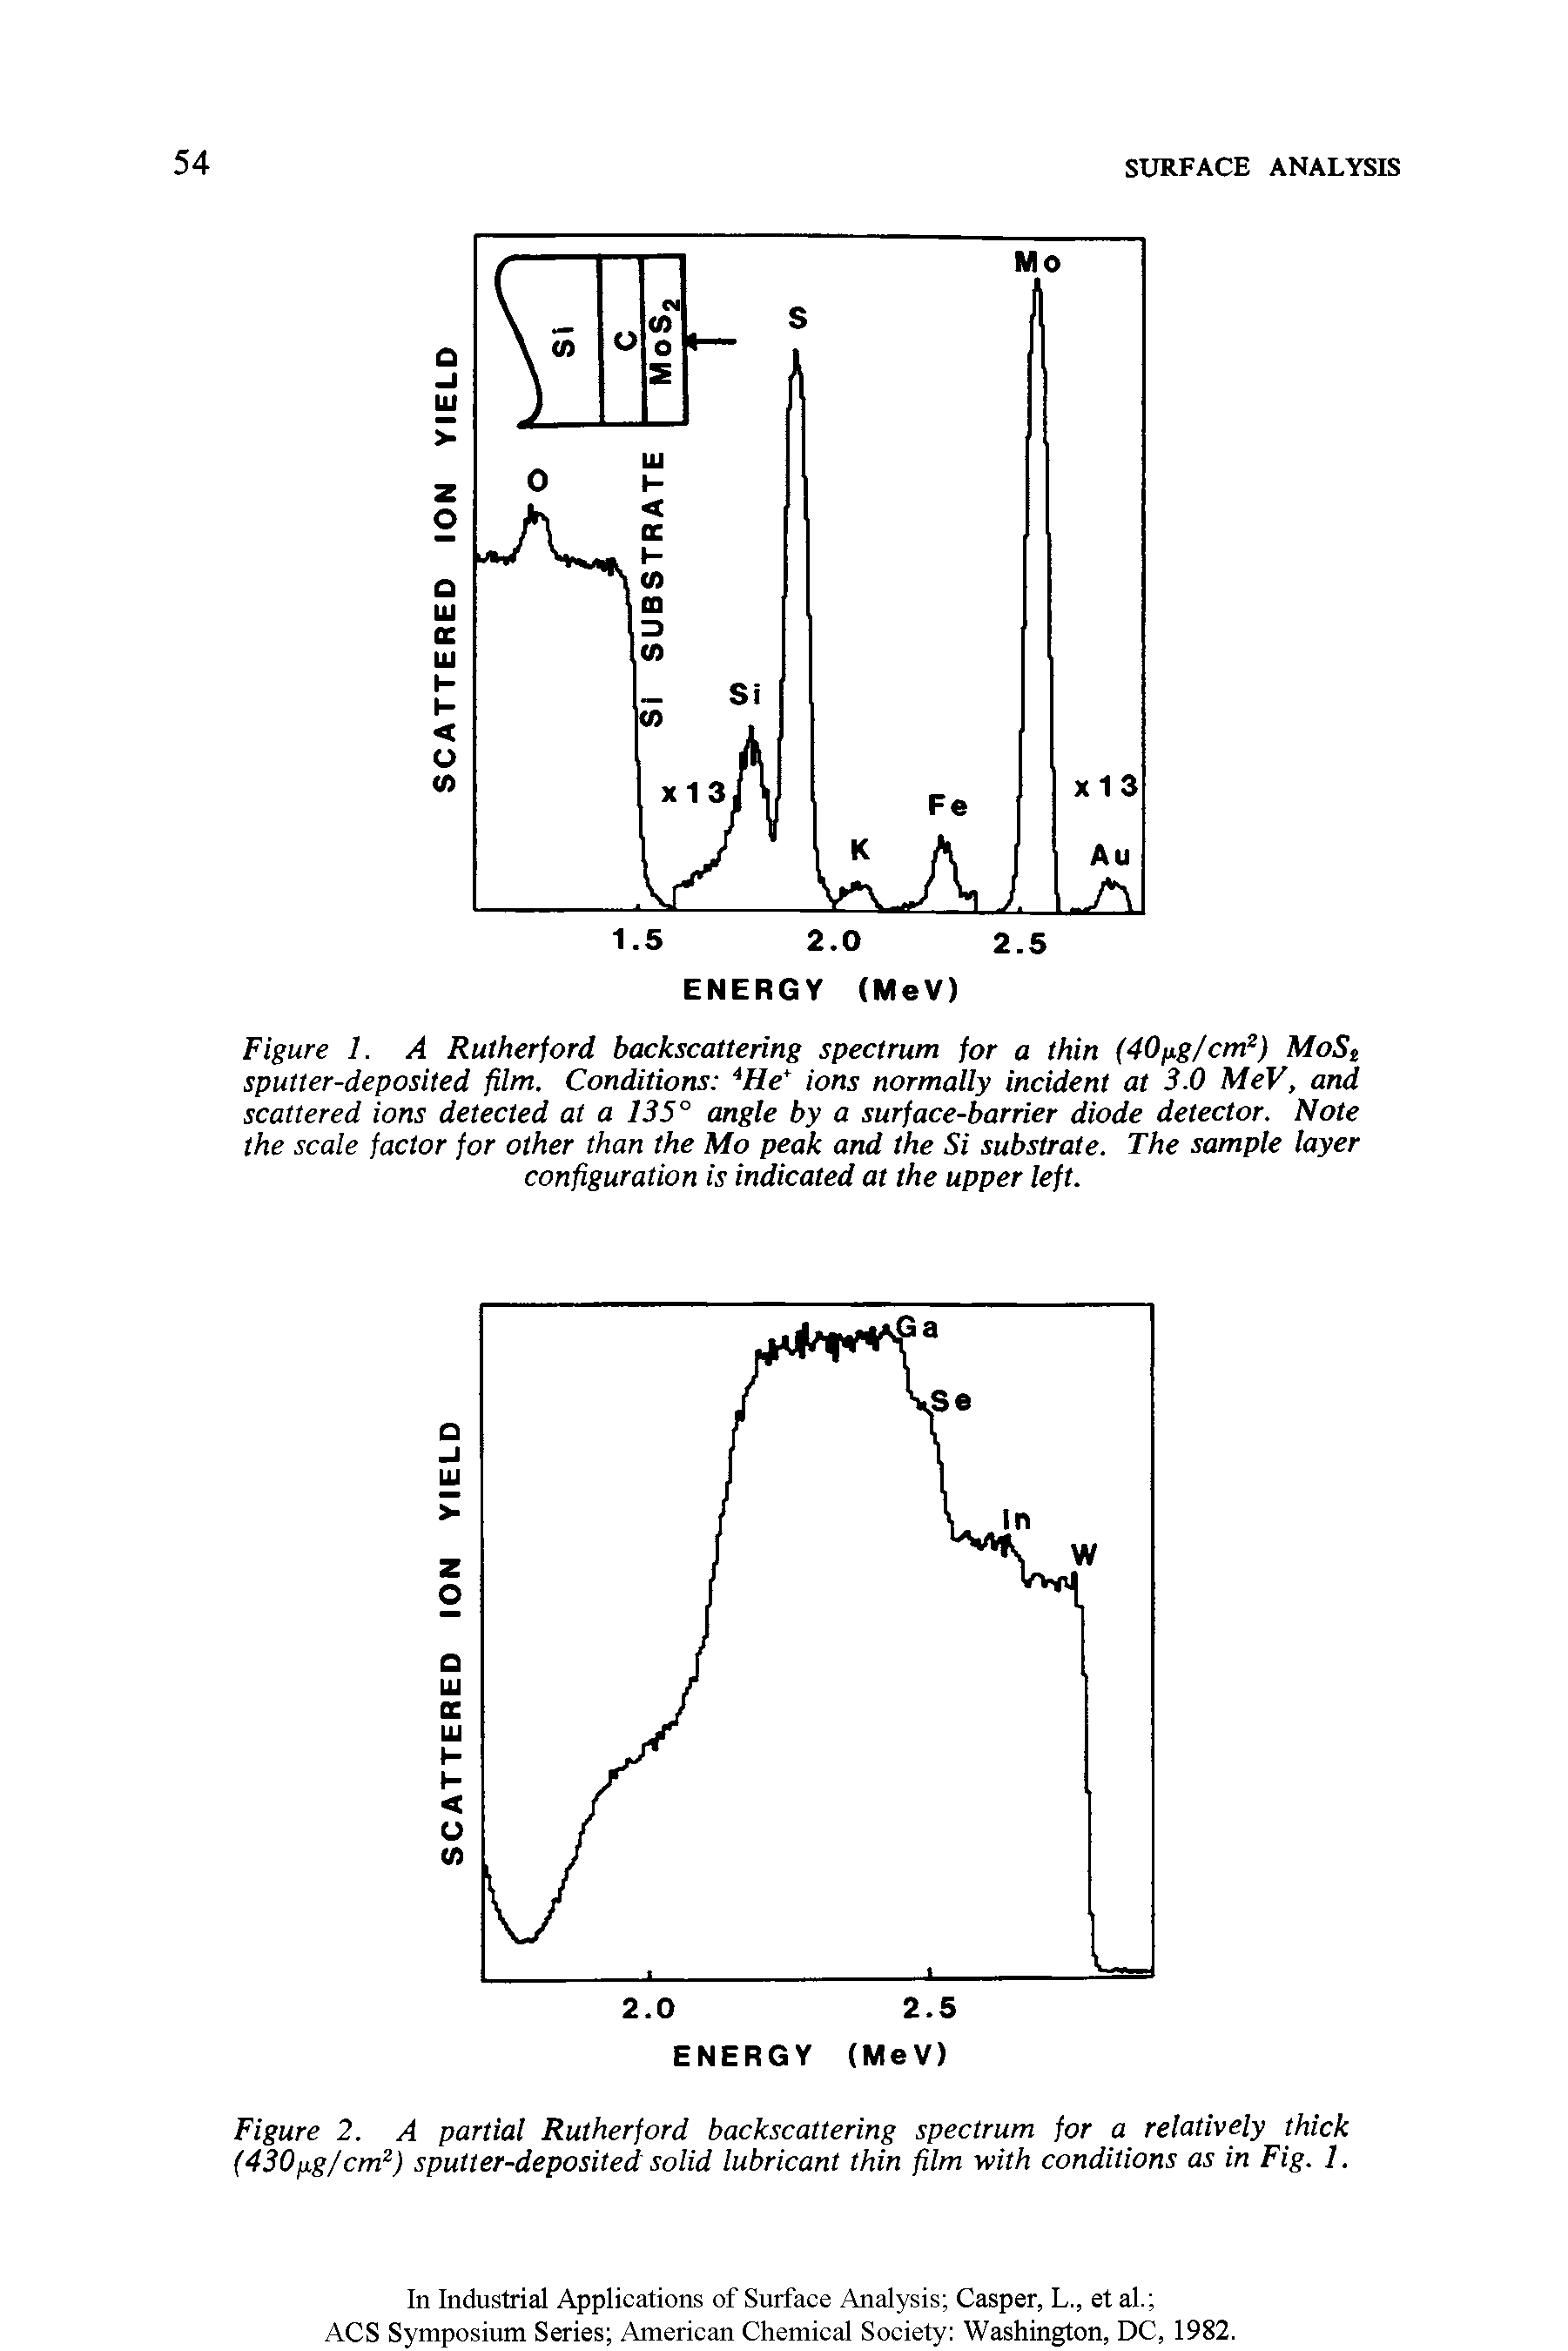 Figure 1. A Rutherford backscattering spectrum for a thin (40/ig/cm2) MoSt sputter-deposited film. Conditions 4He ions normally incident at 3.0 MeV, and scattered ions detected at a 135° angle by a surface-barrier diode detector. Note the scale factor for other than the Mo peak and the Si substrate. The sample layer configuration is indicated at the upper left.